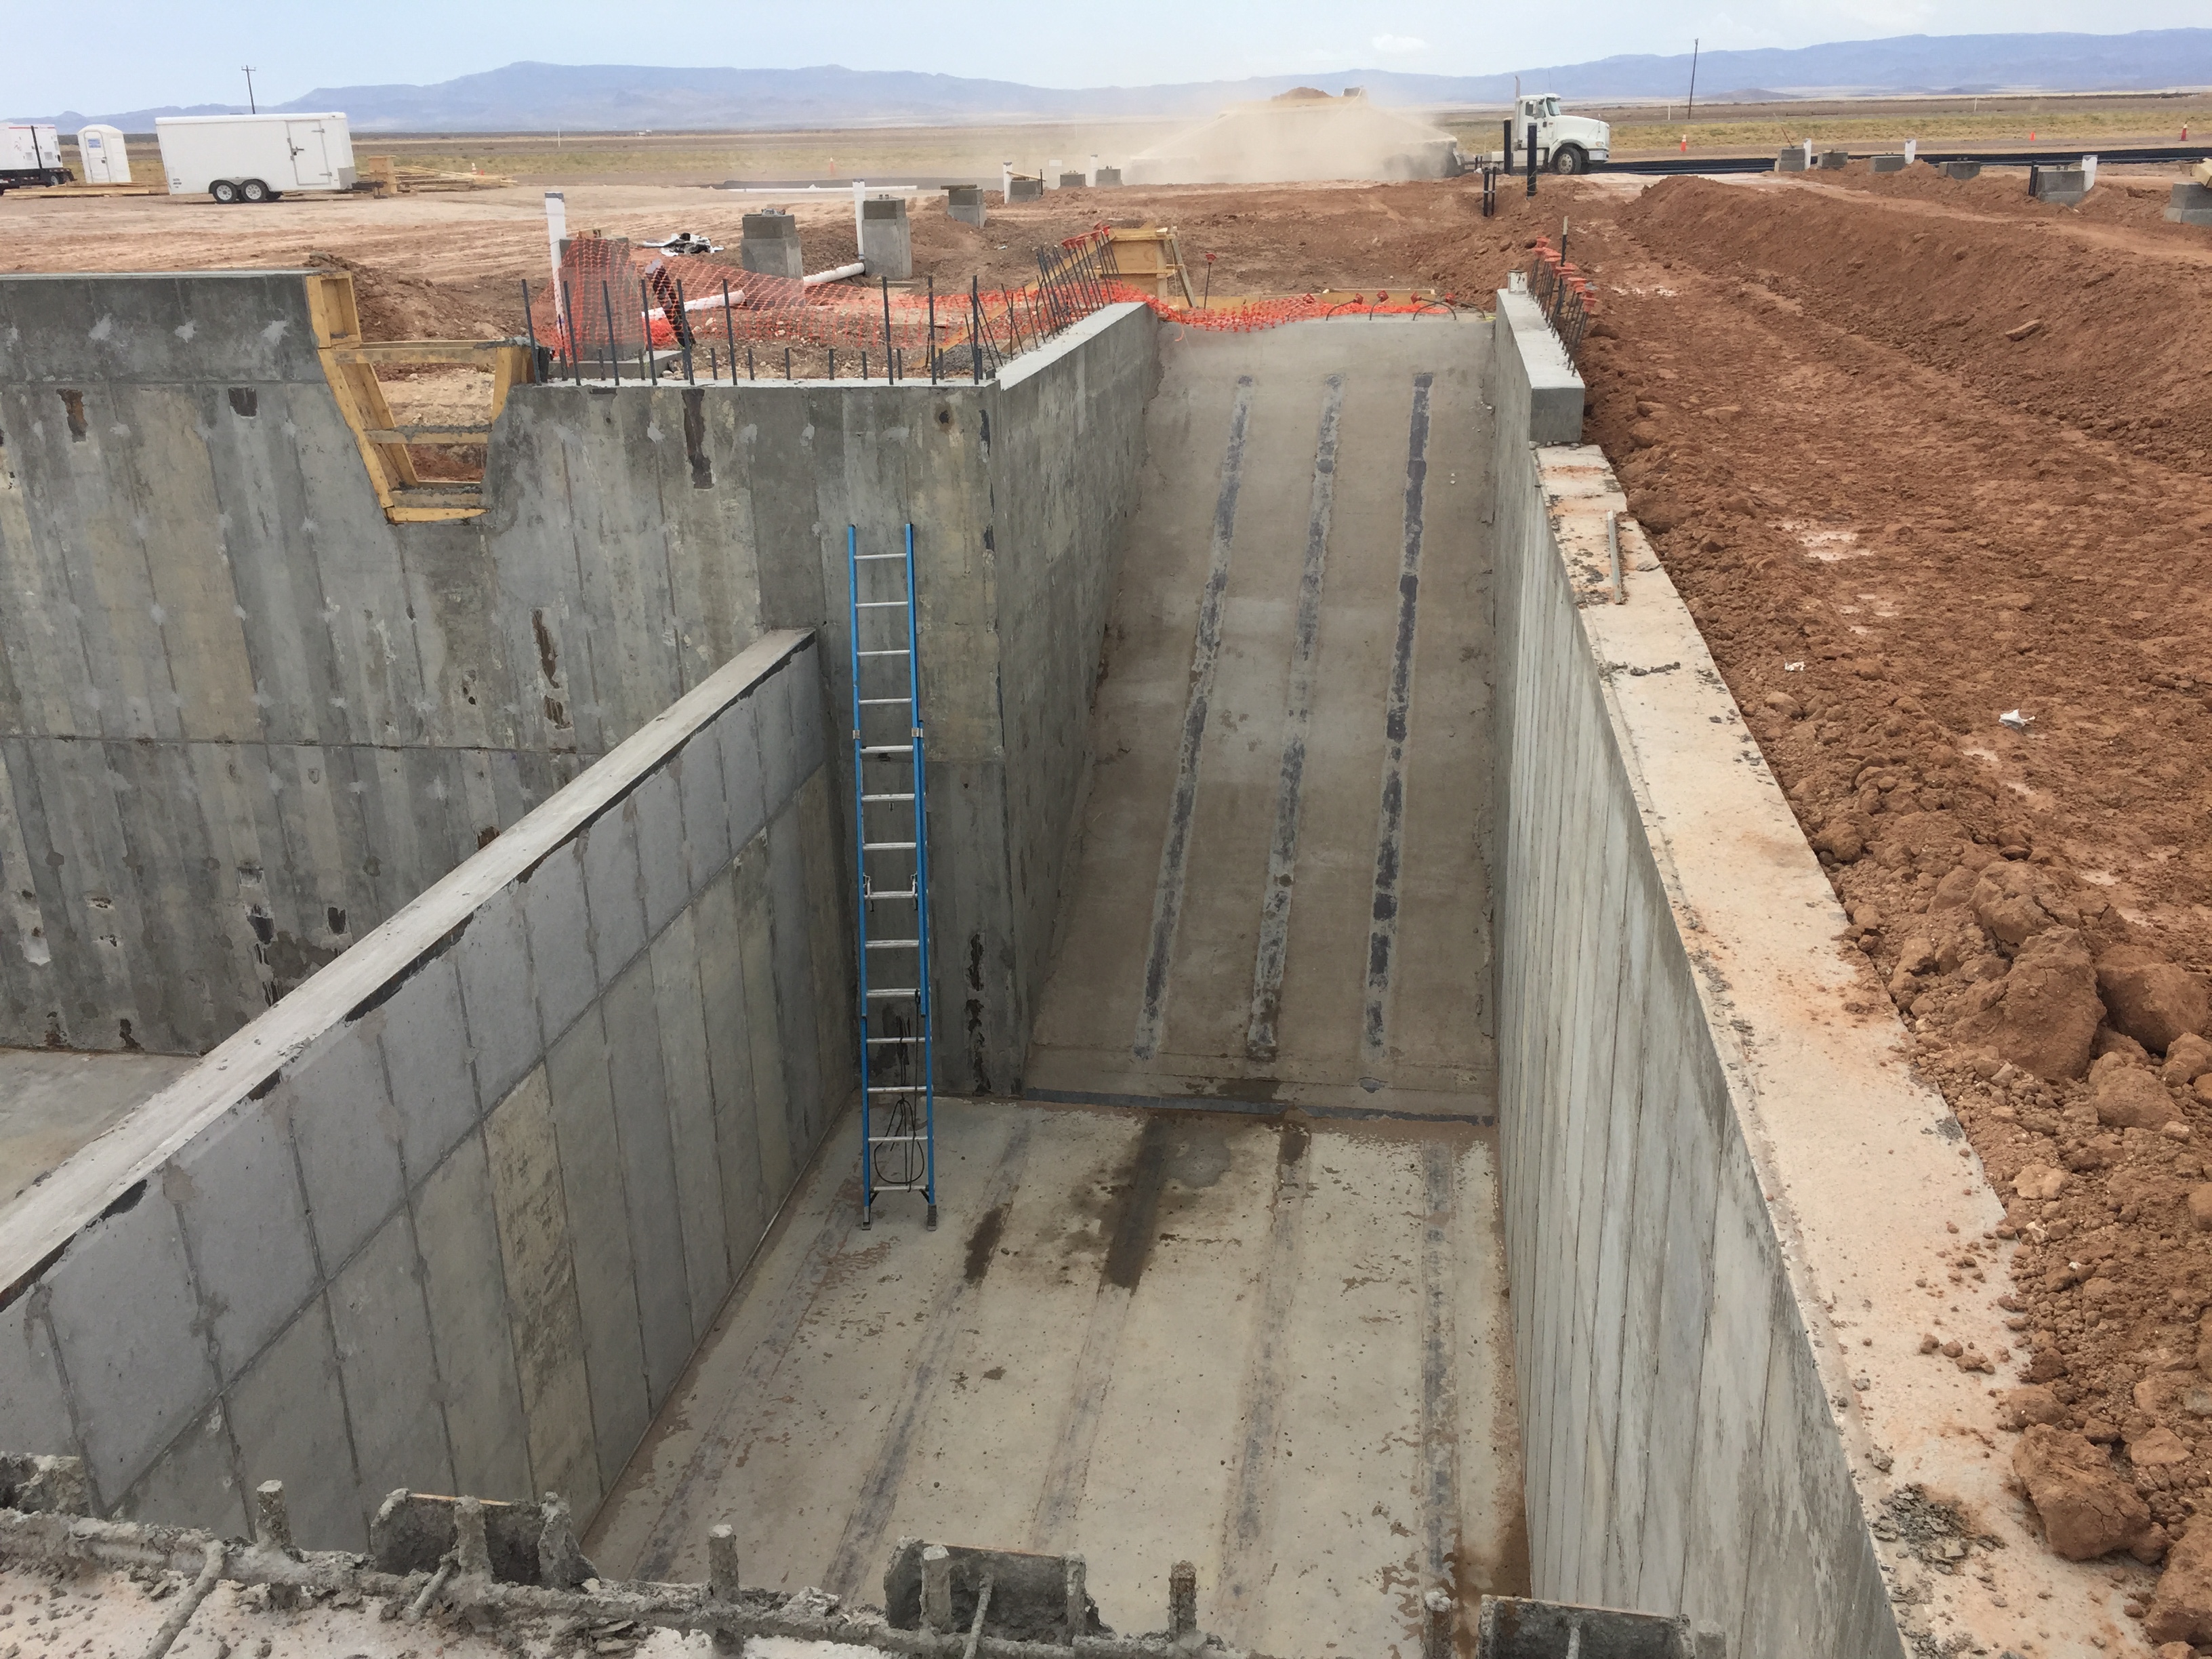 Durable solution: PENETRON ADMIX protects concrete against water penetration and the effects of deterioration, even under the constant hydrostatic pressure of the Balmorhea saltwater disposal tanks.